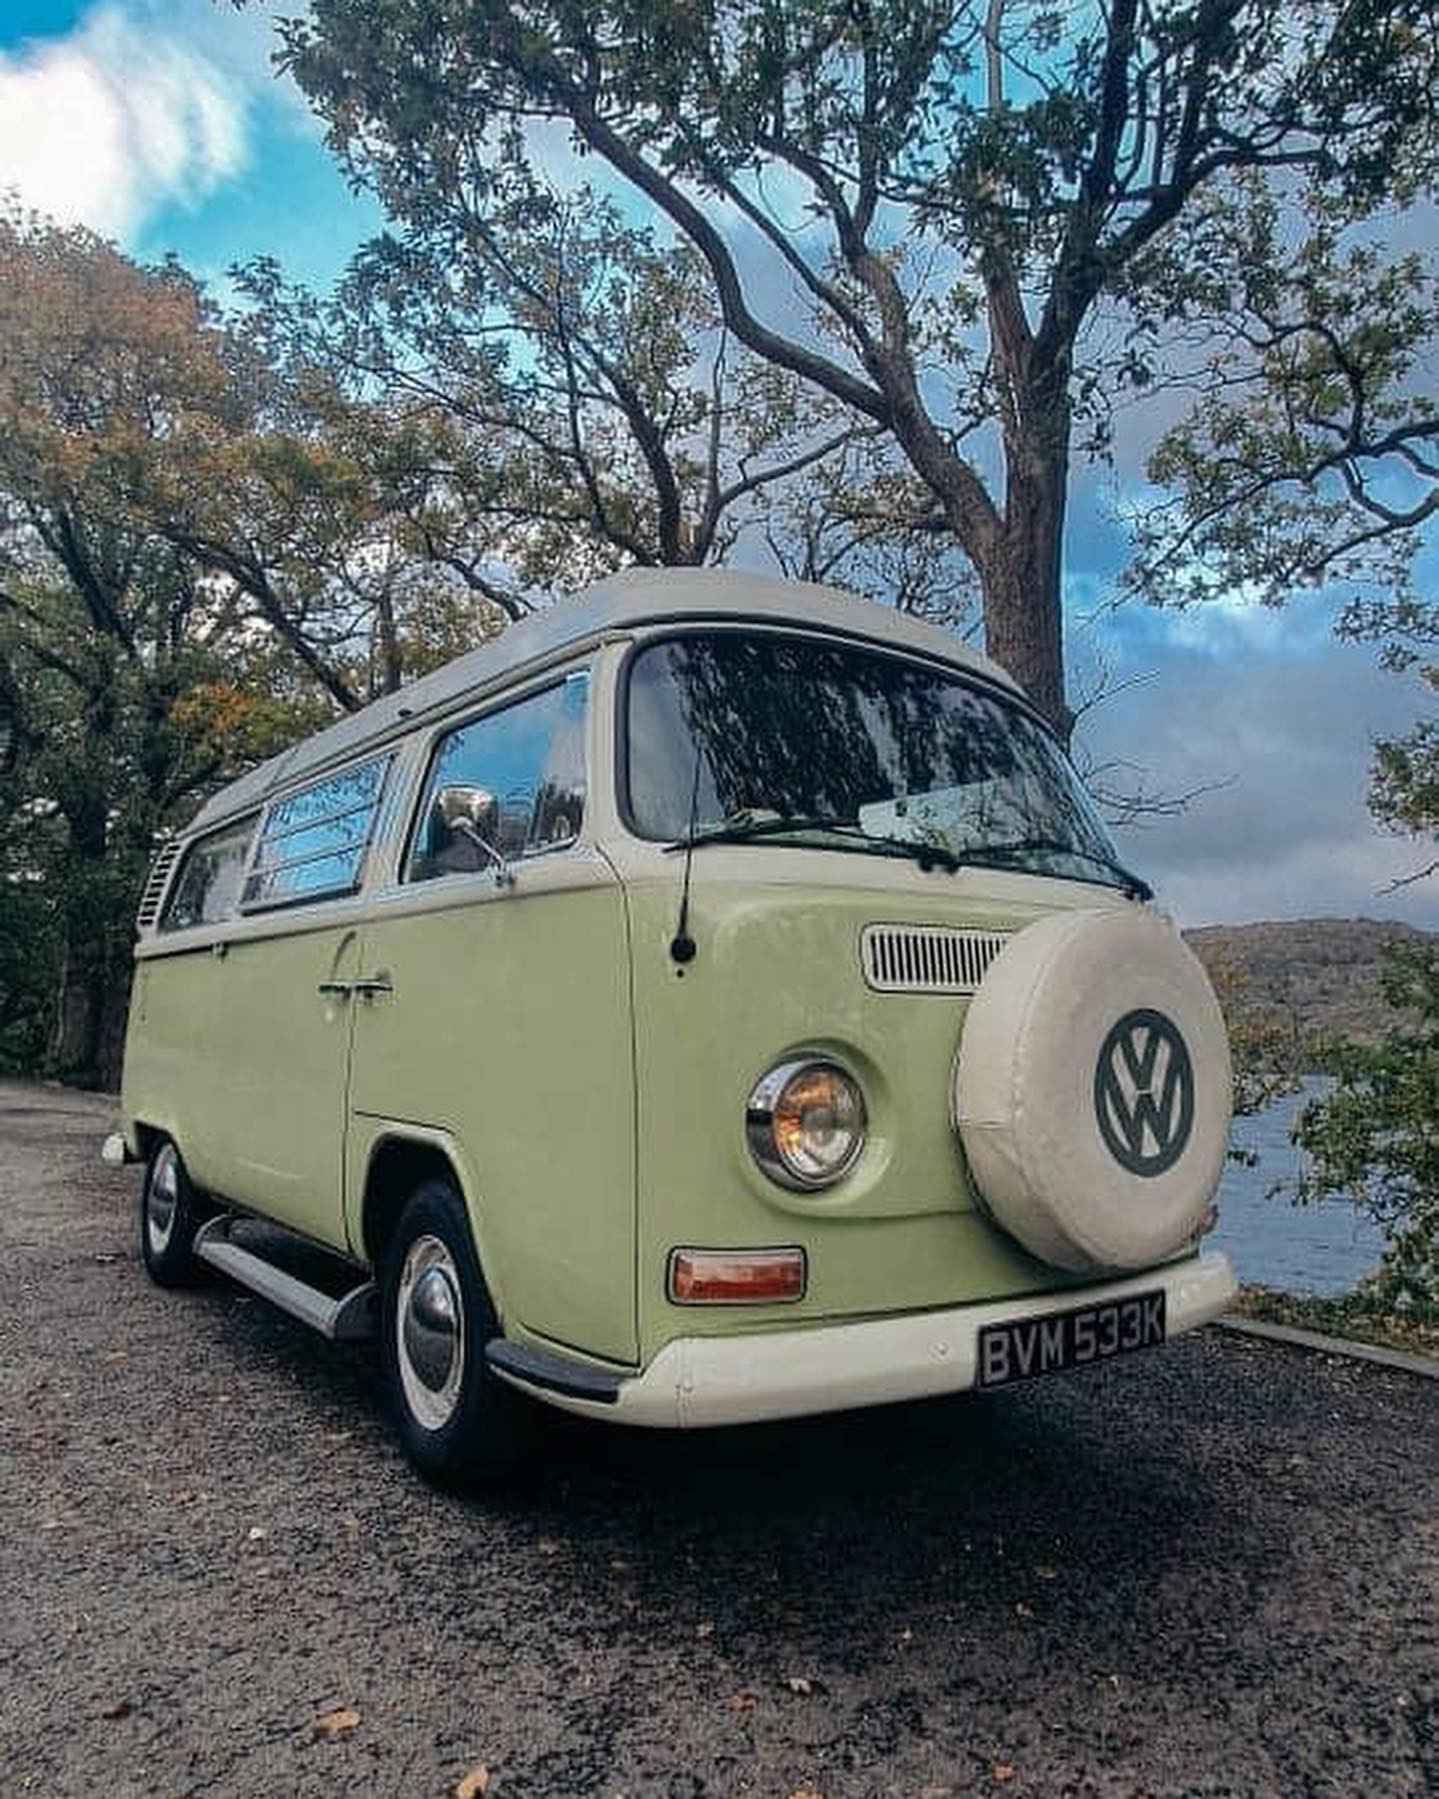 A VW T2 Classic Campervan called Florence-T2 and for hire in Darlington, England